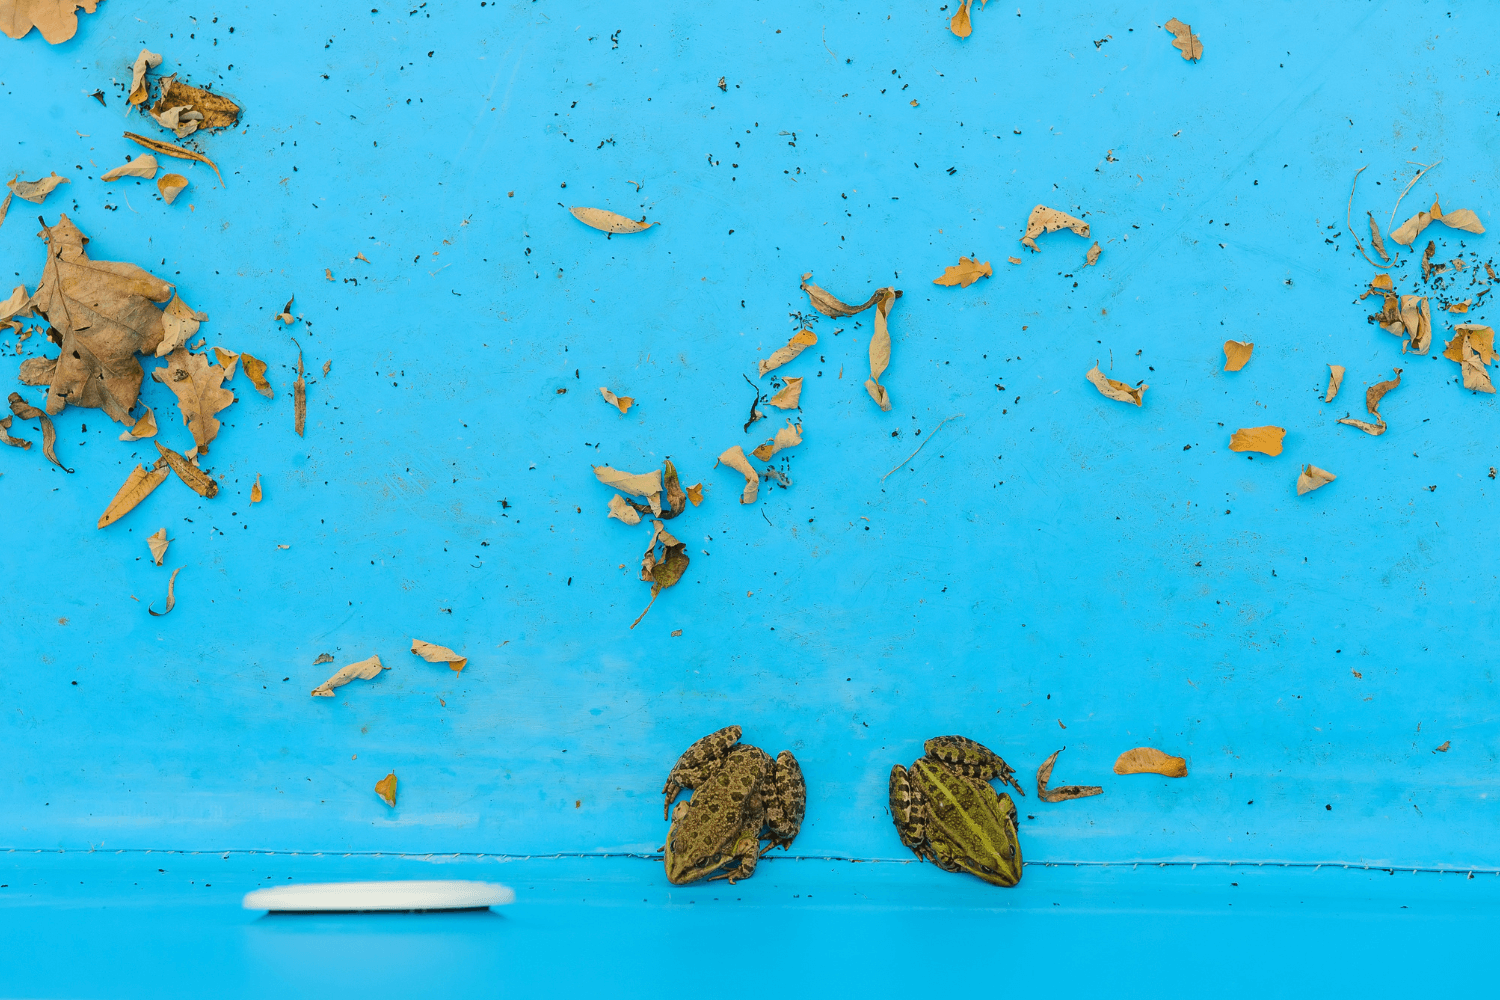 Two frogs sitting at the bottom of a swimming pool with leaves and debris